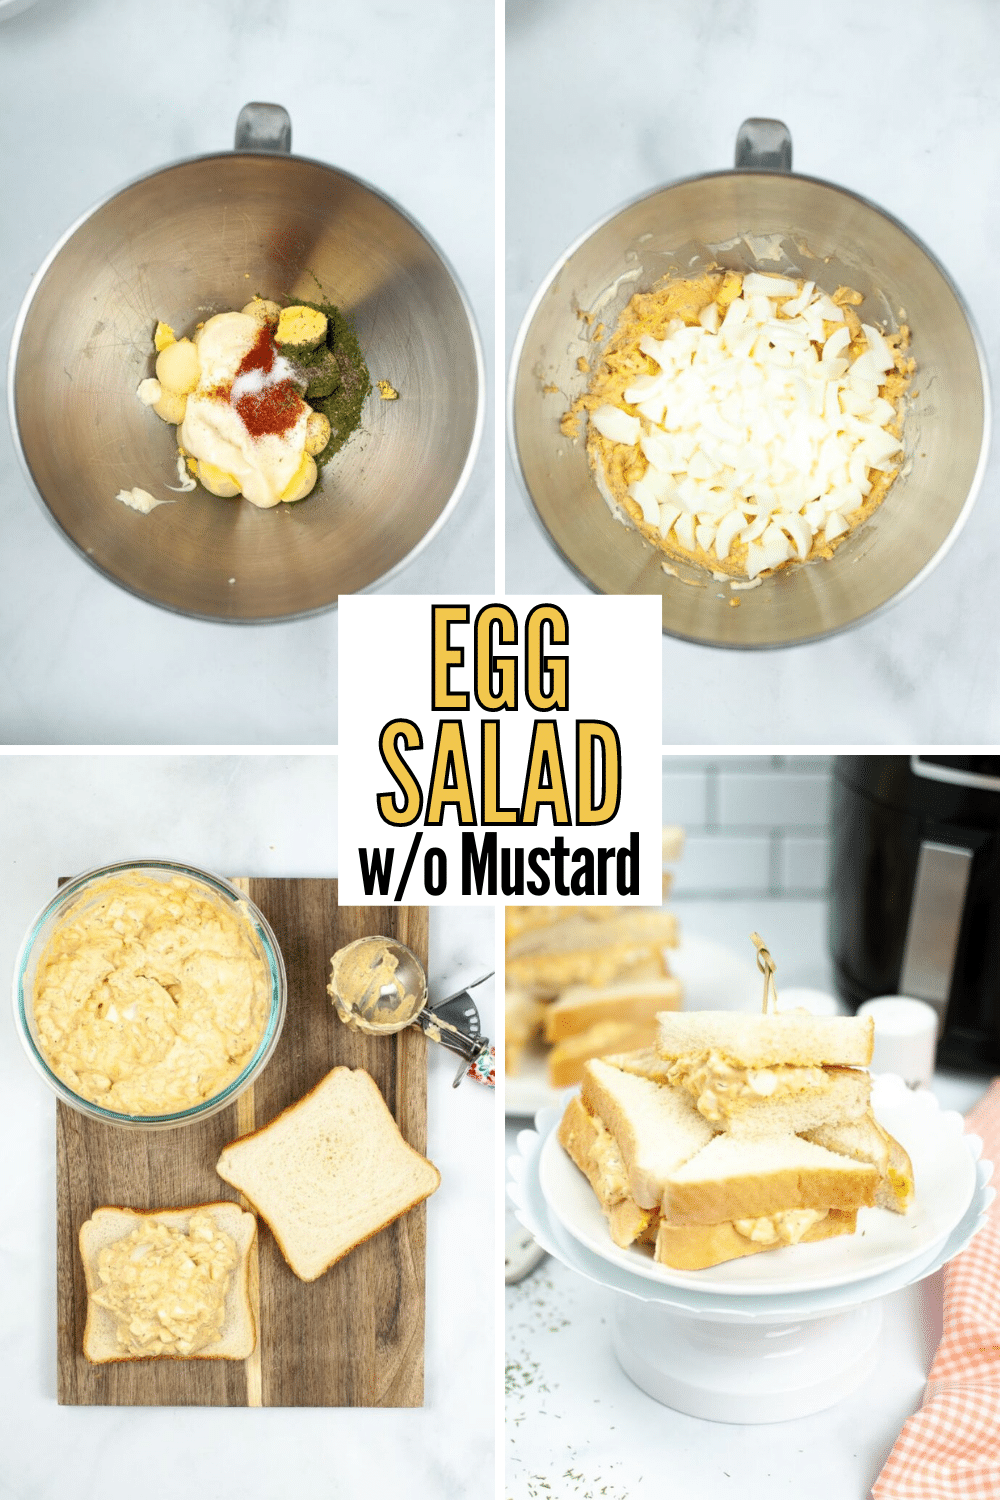 Sandwiches filled with Egg Salad Without Mustard come together quickly with Air Fryer Hard Boiled Eggs. Lots of flavor but not too spicy! #airfryer #eggsalad #lunchrecipe #hardboiledeggs via @wondermomwannab